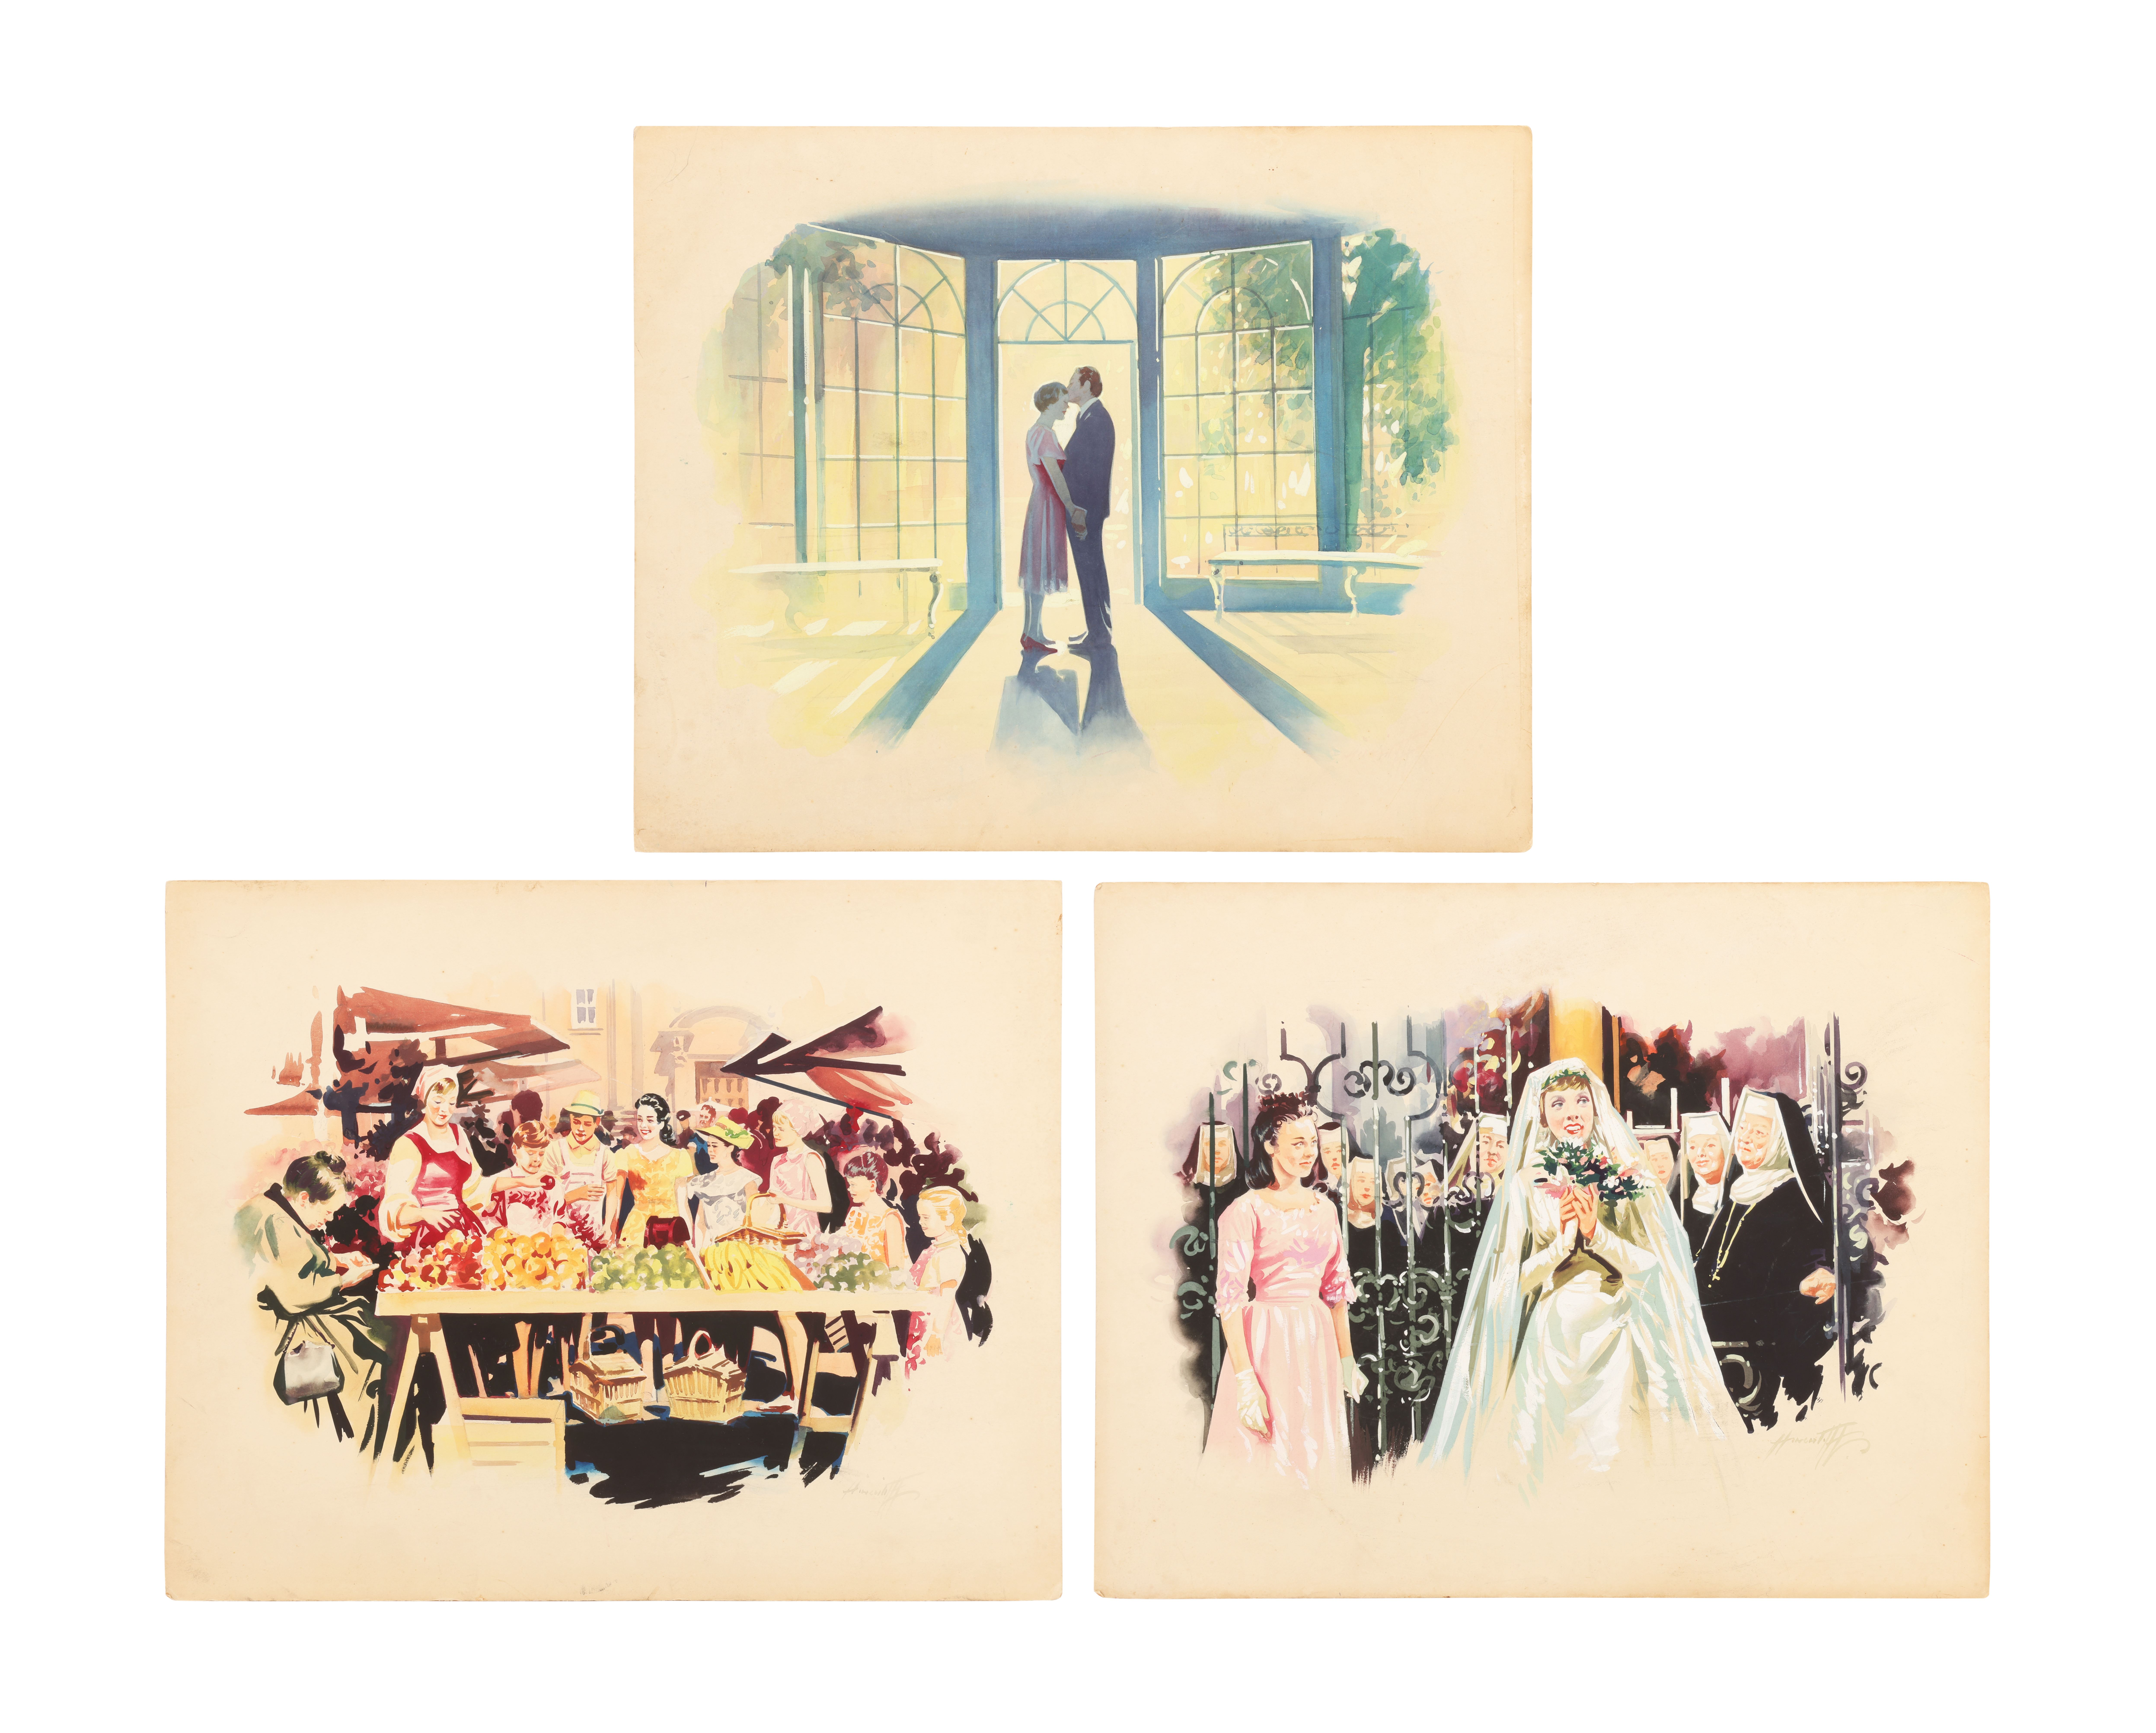 THE SOUND OF MUSIC (1965) - Three Hand-Painted Premiere Foyer Display Artworks, 1965